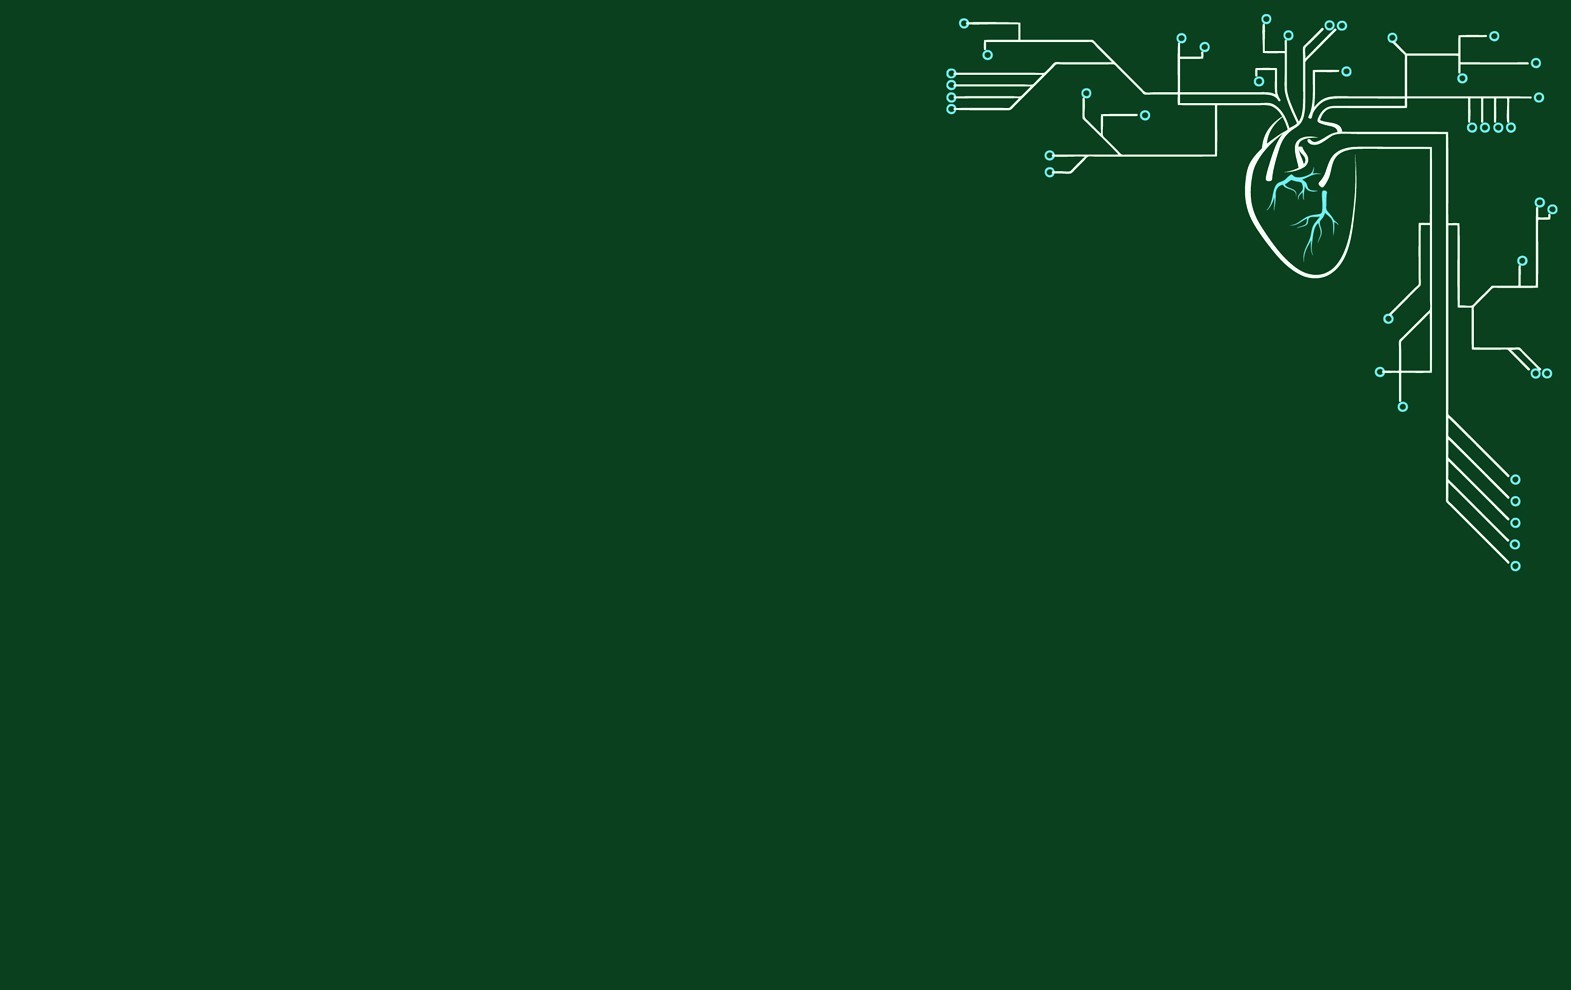 General 1571x990 technology digital art circuitry green background simple background electronic line art